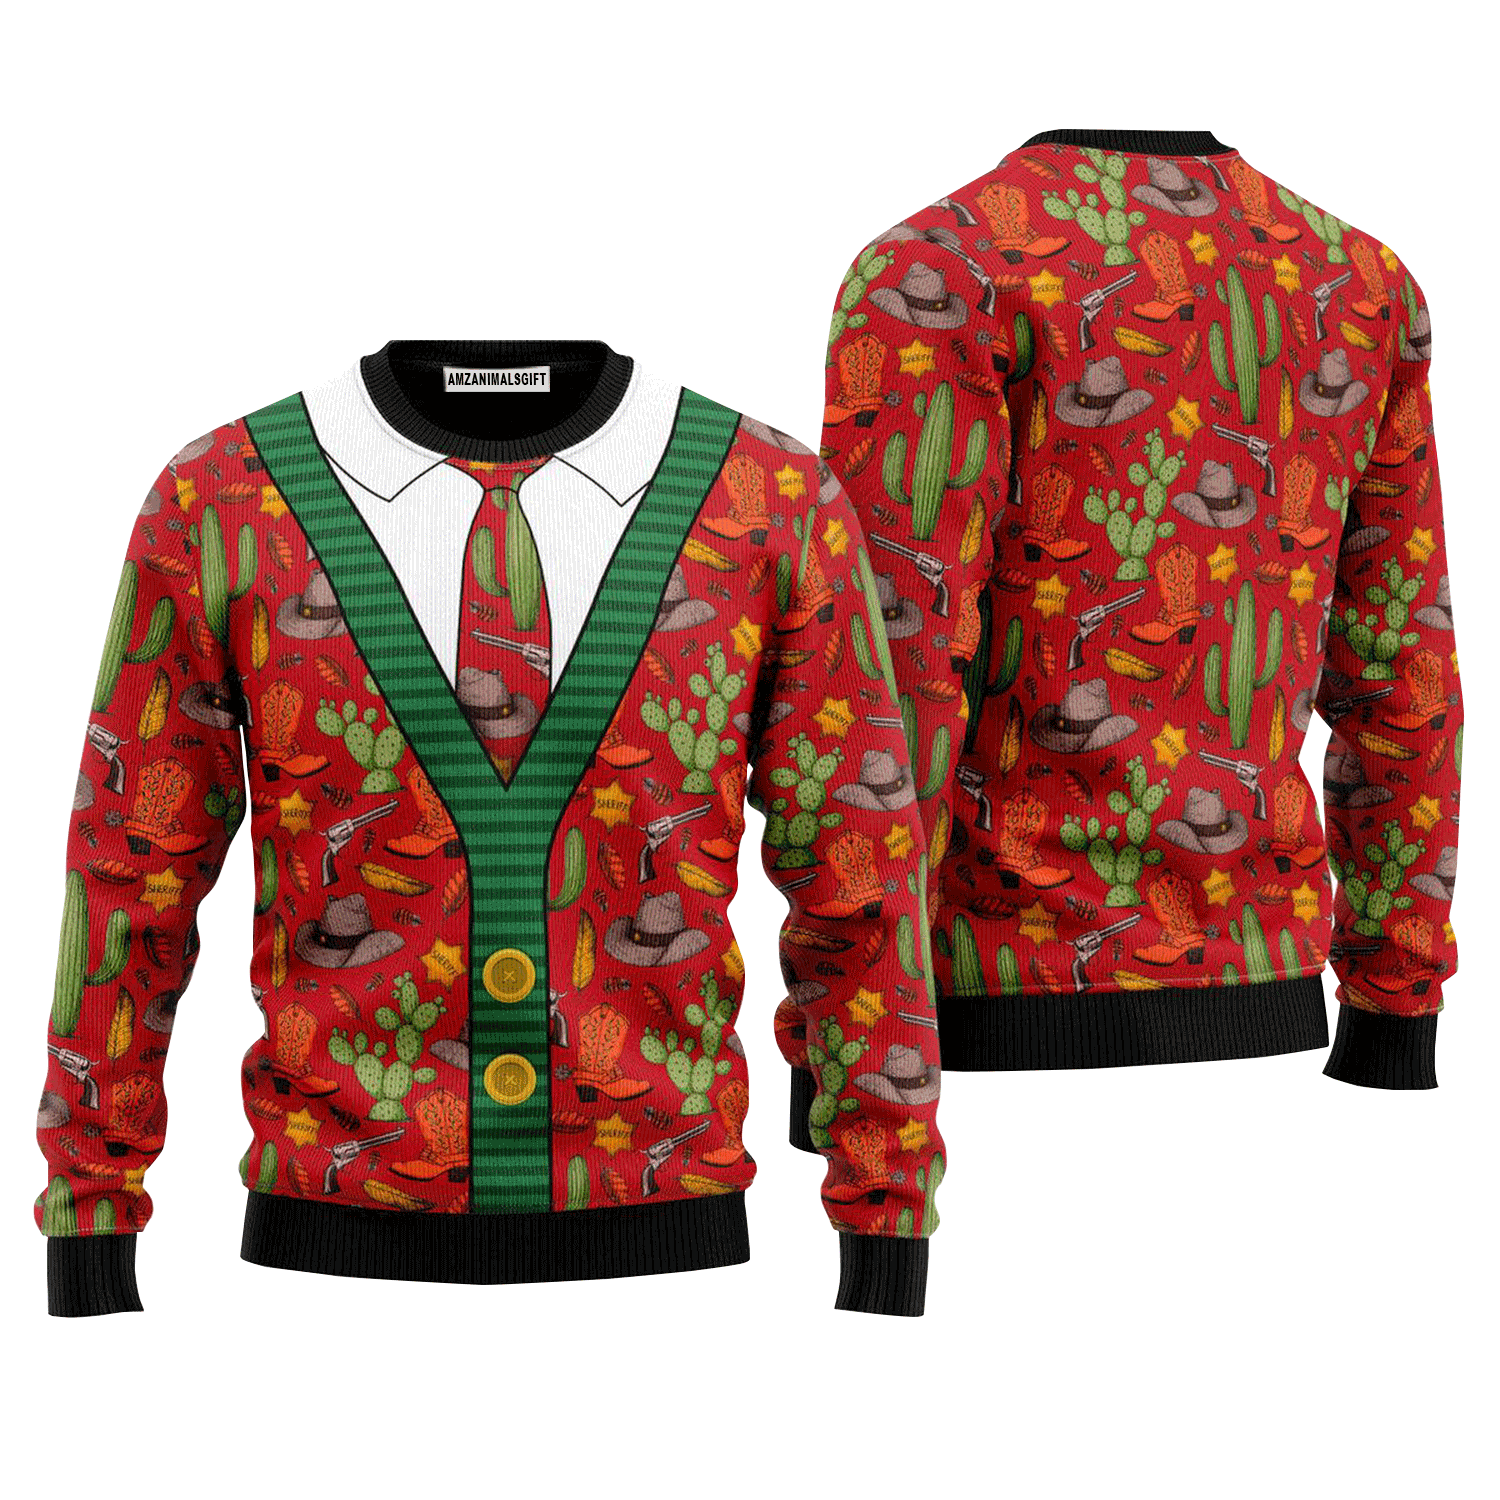 Cowboy Ugly Christmas Sweater, Ugly Sweater For Men & Women, Perfect Outfit For Christmas New Year Autumn Winter